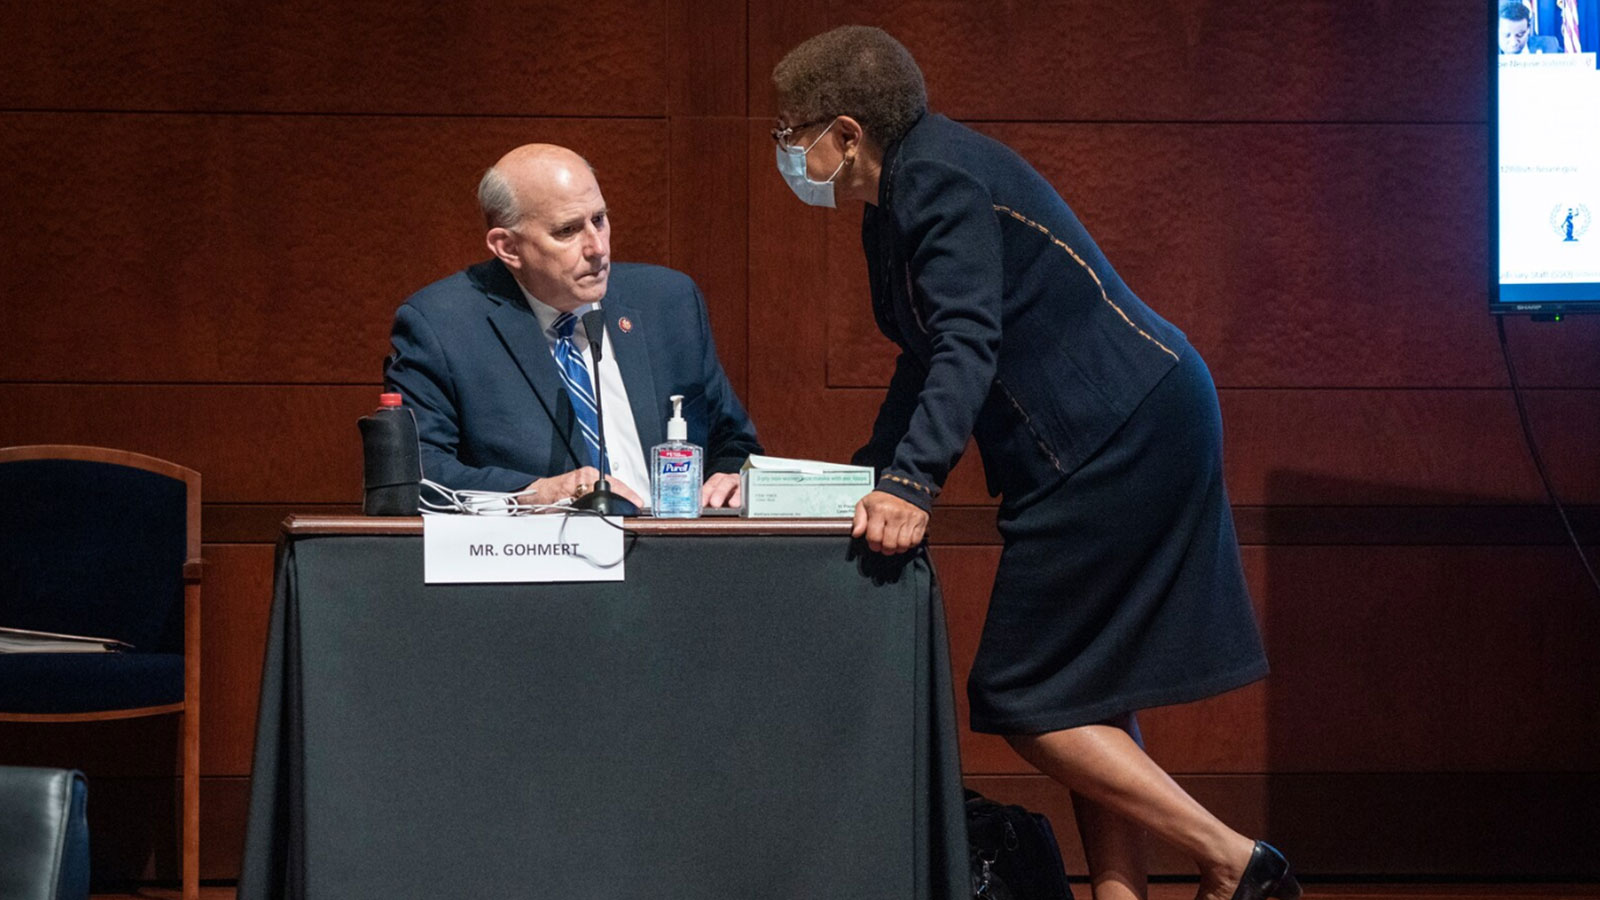 Rep. Karen Bass (D-Calif.) speaks with Rep. Louie Gohmert (R-Tex.) during a House Judiciary Committee markup on the Justice in Policing Act of 2020 at the Capitol on June 17, 2020. 